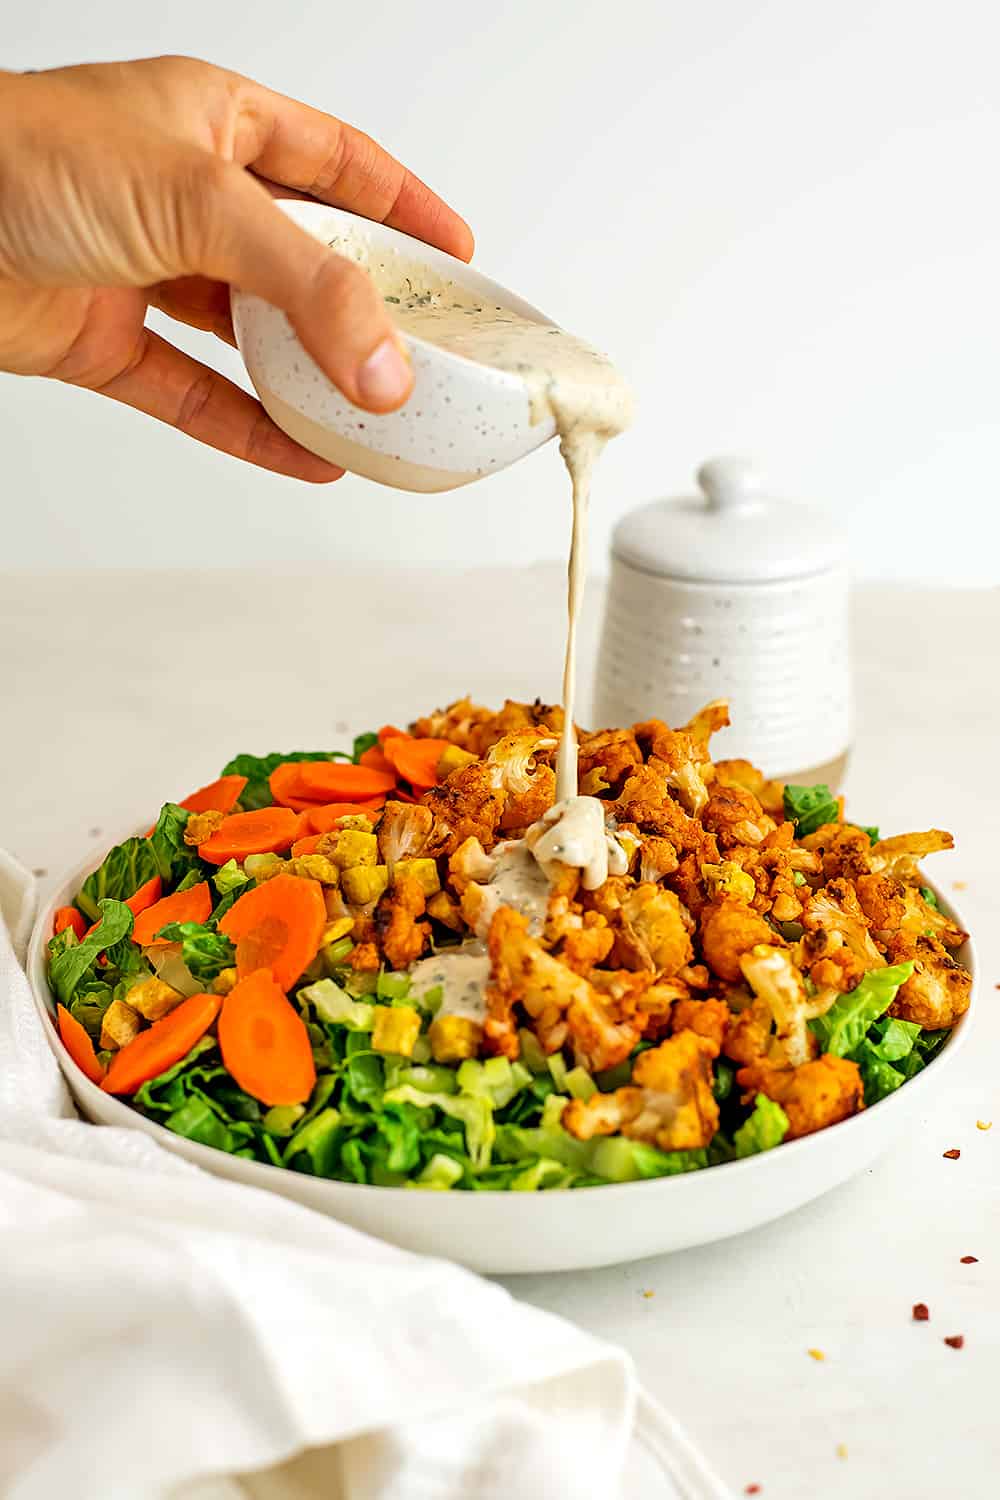 Tahini ranch dressing being poured over buffalo cauliflower salad.